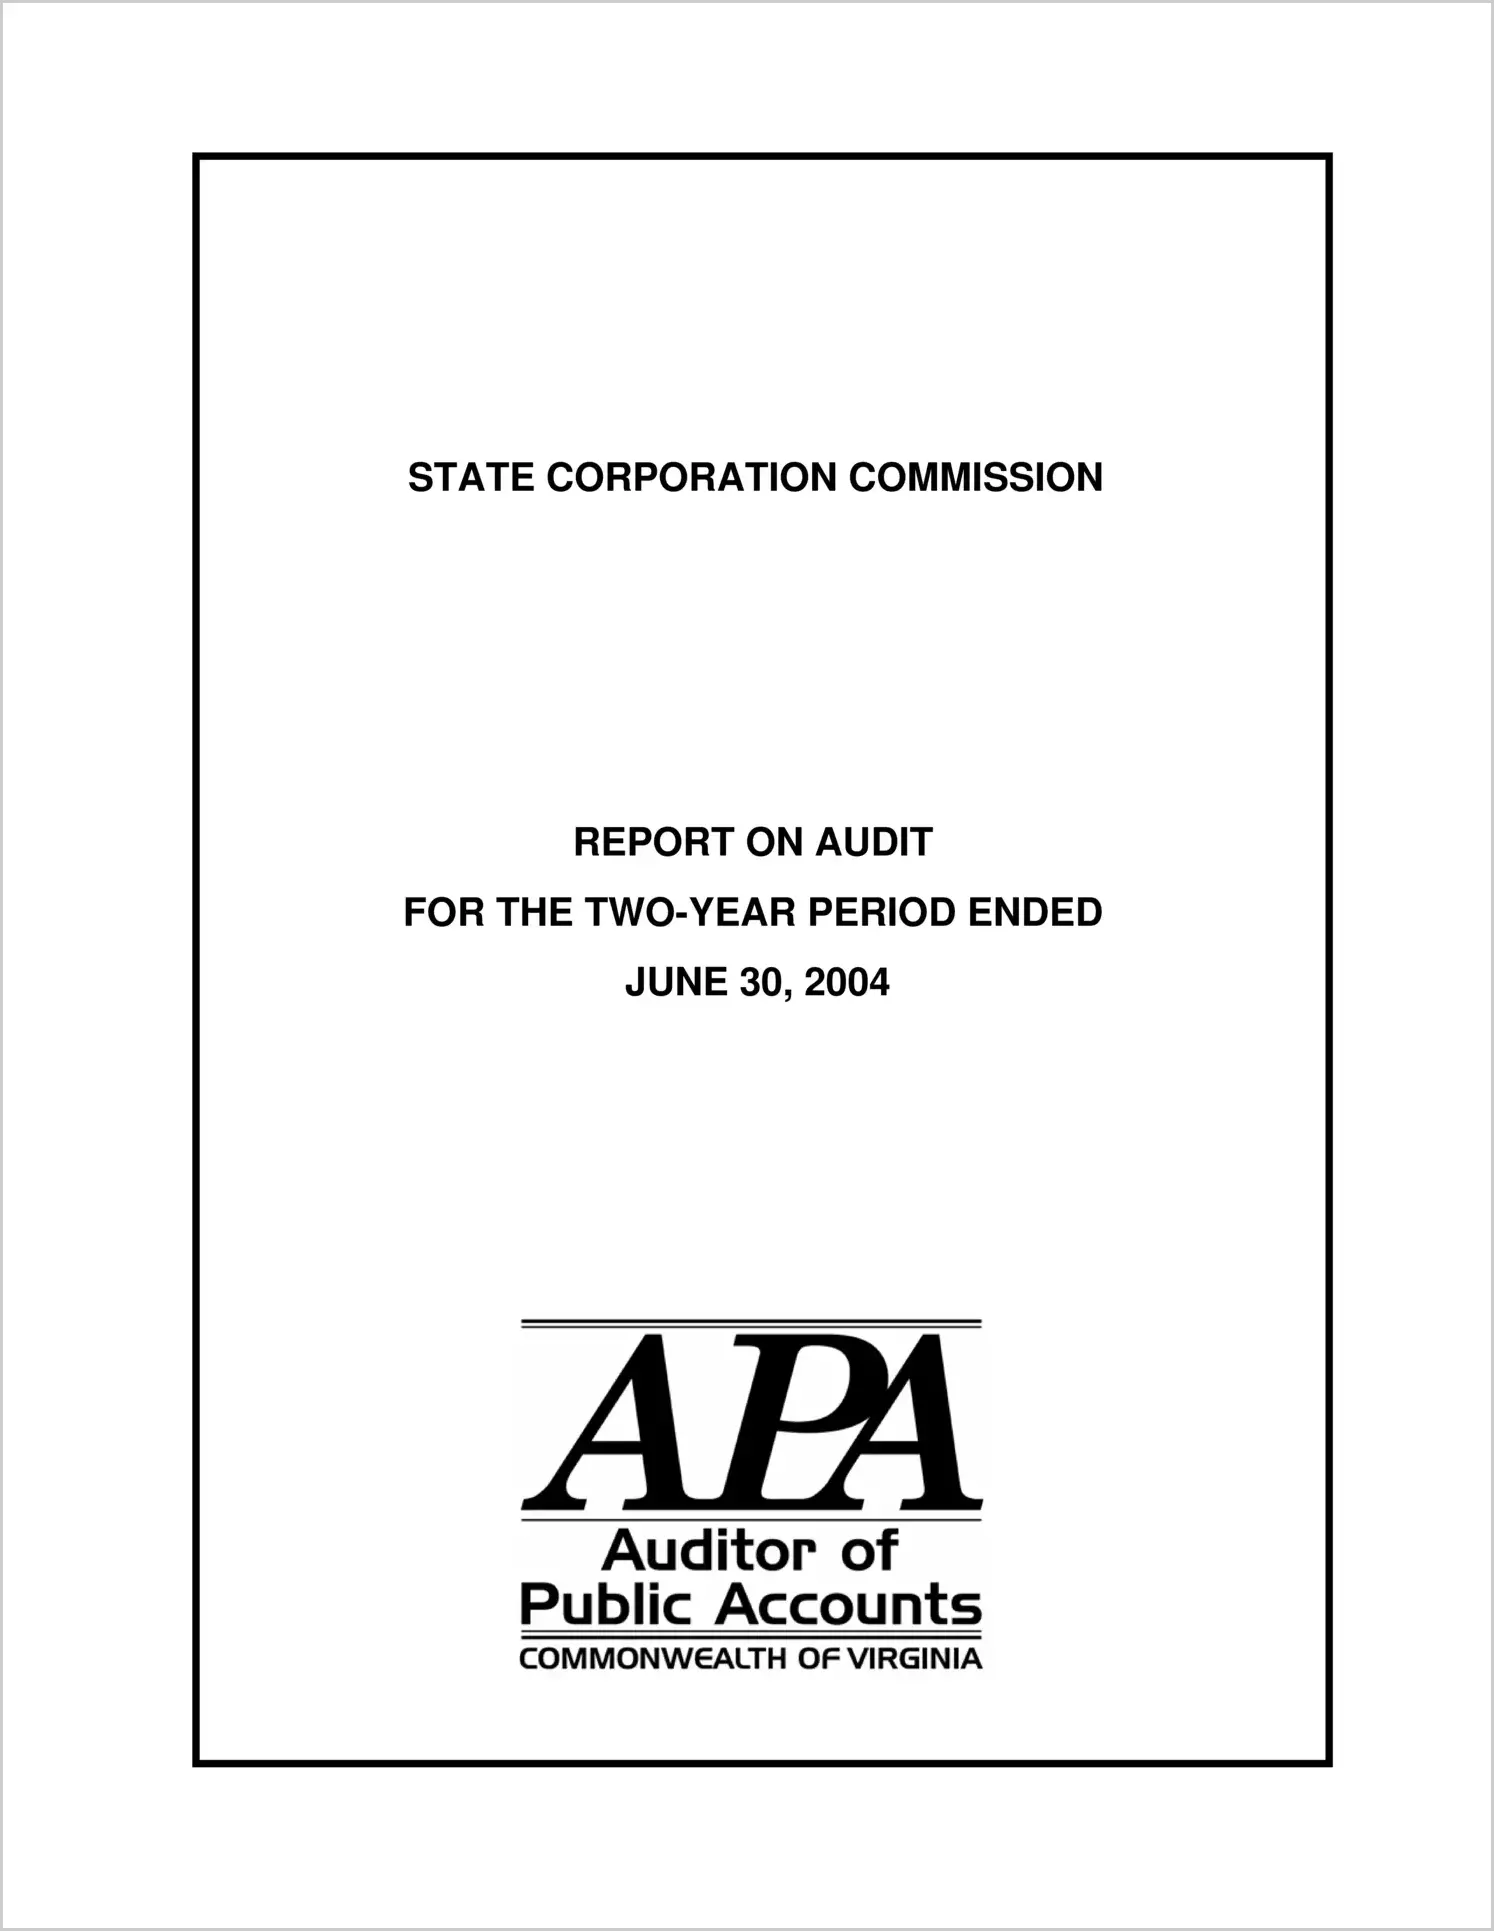 State Corporation Commission for the two-year period ended June 30, 2004